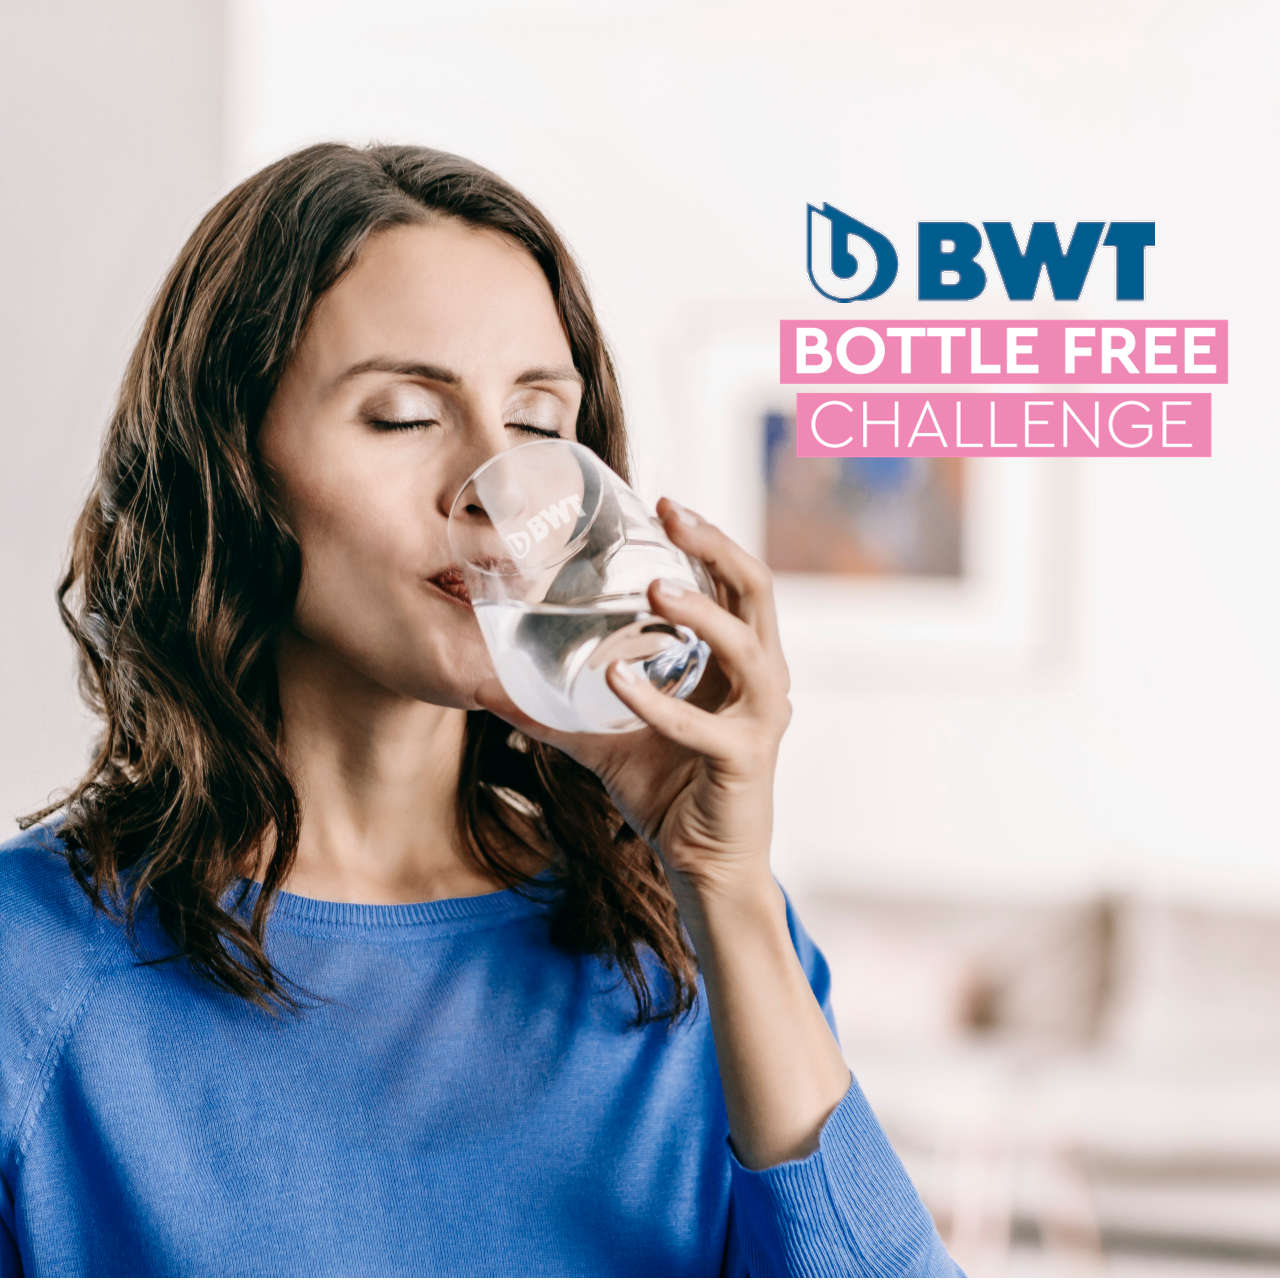 bottle free challenge terms and conditions